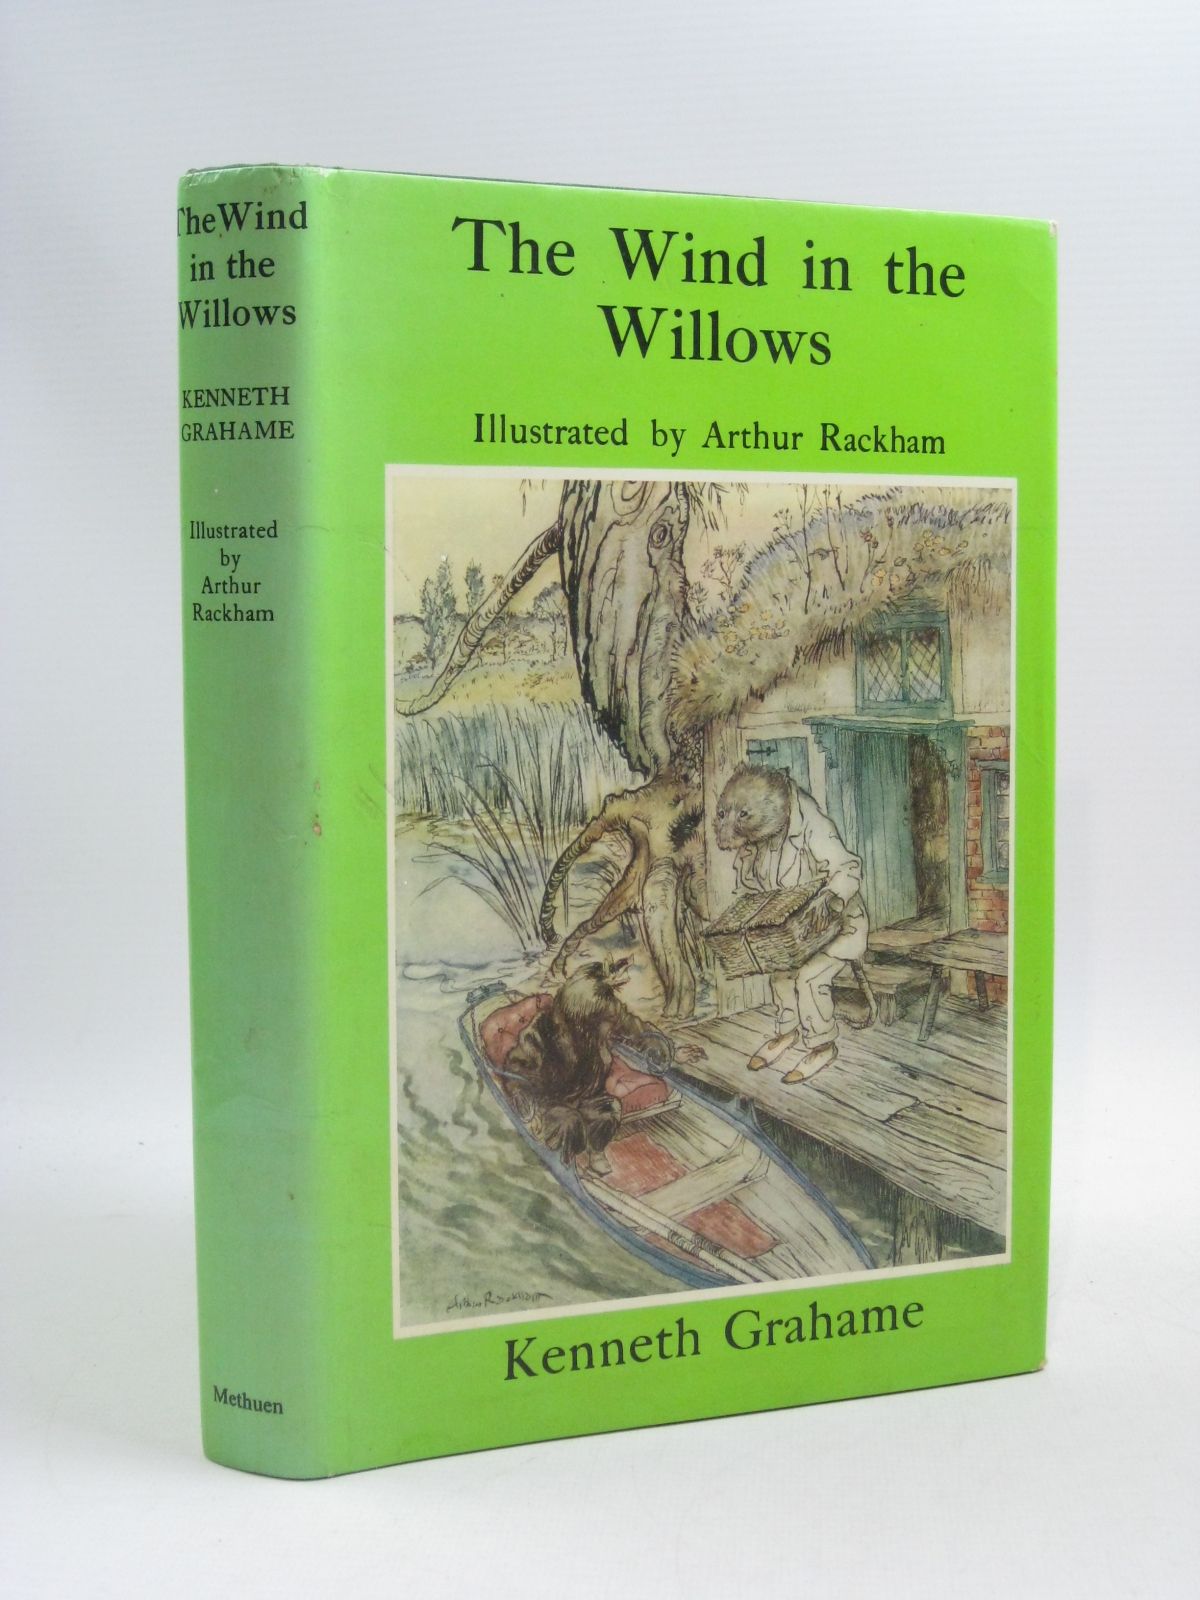 The Wind in the Willows  Illustrated by Arthur Rackham